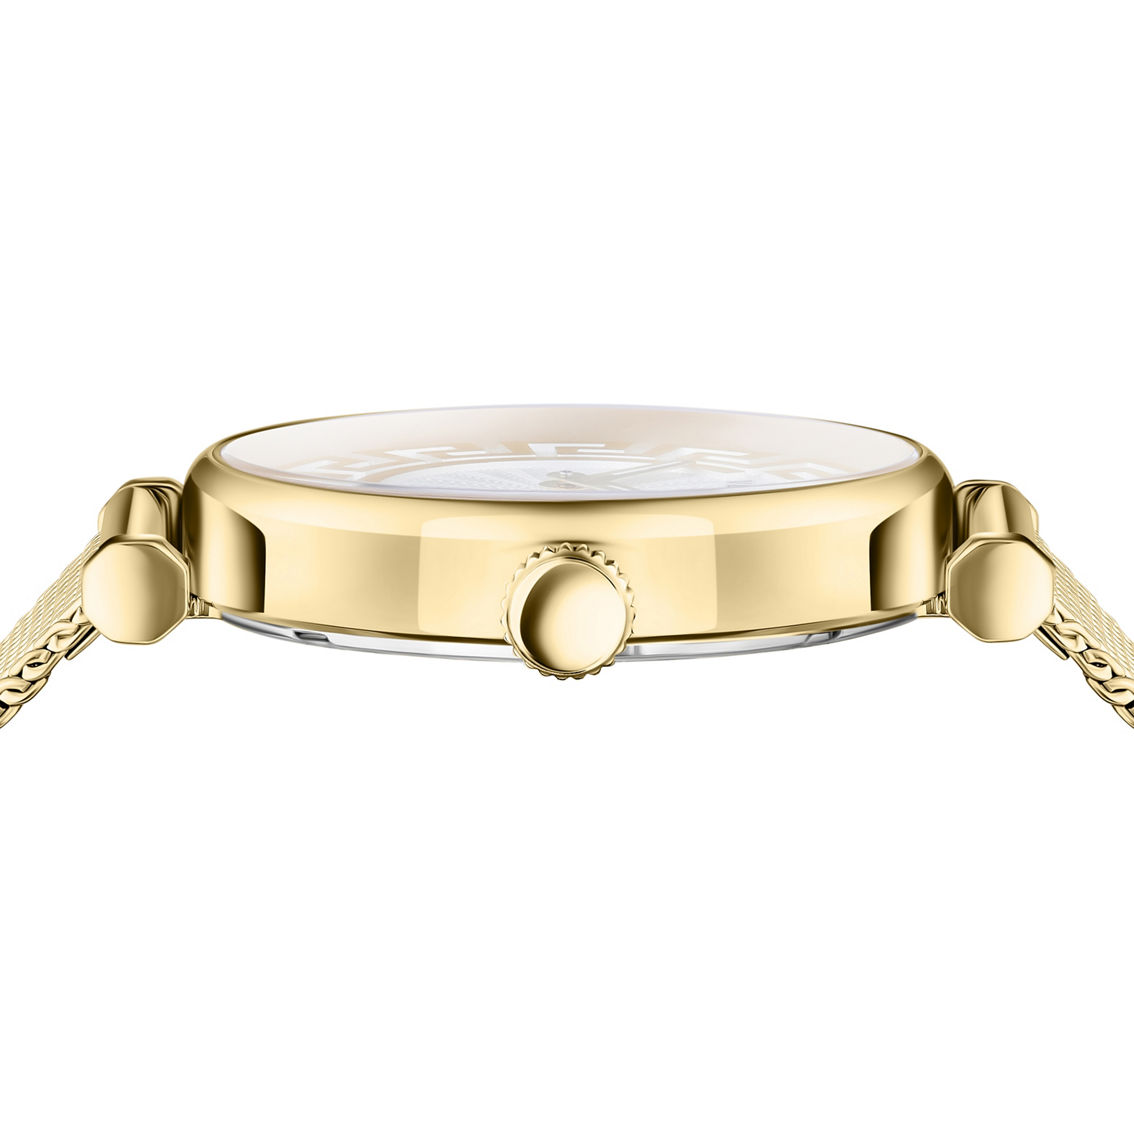 Versace 35MM Greca Chic Silver Dial Gold Stainless Steel Bracelet Watch VE1CA0623 - Image 2 of 4